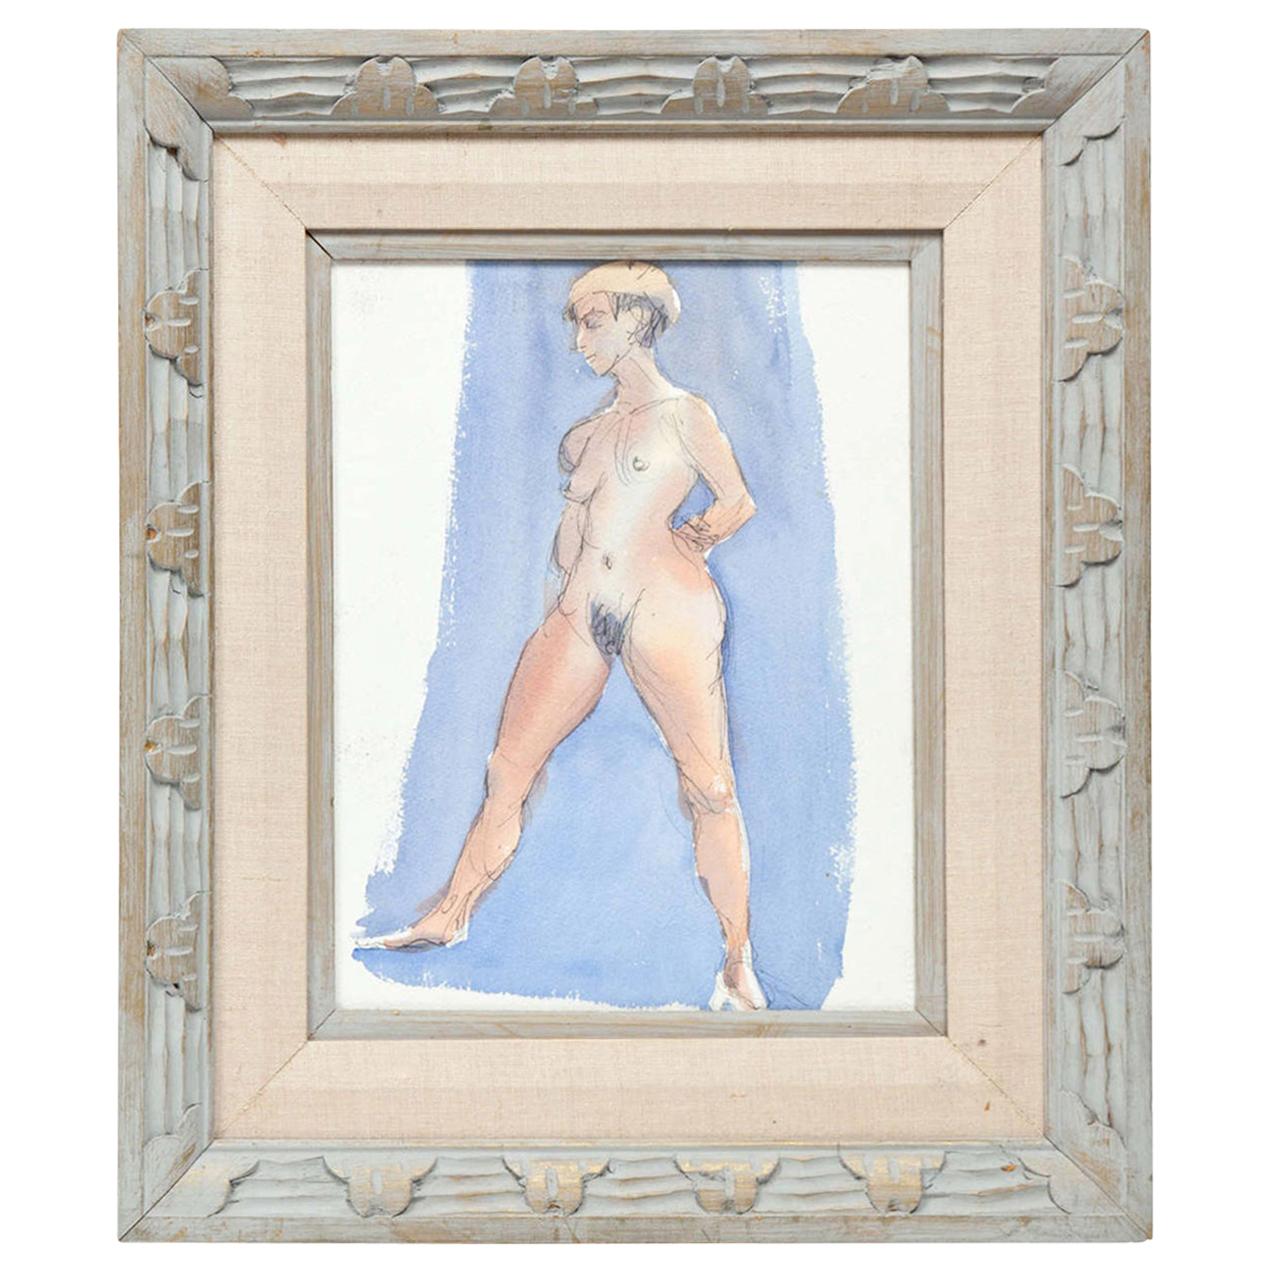 Painting by Barbara Pound, circa 1960, Sky Blue and Rose, Nude